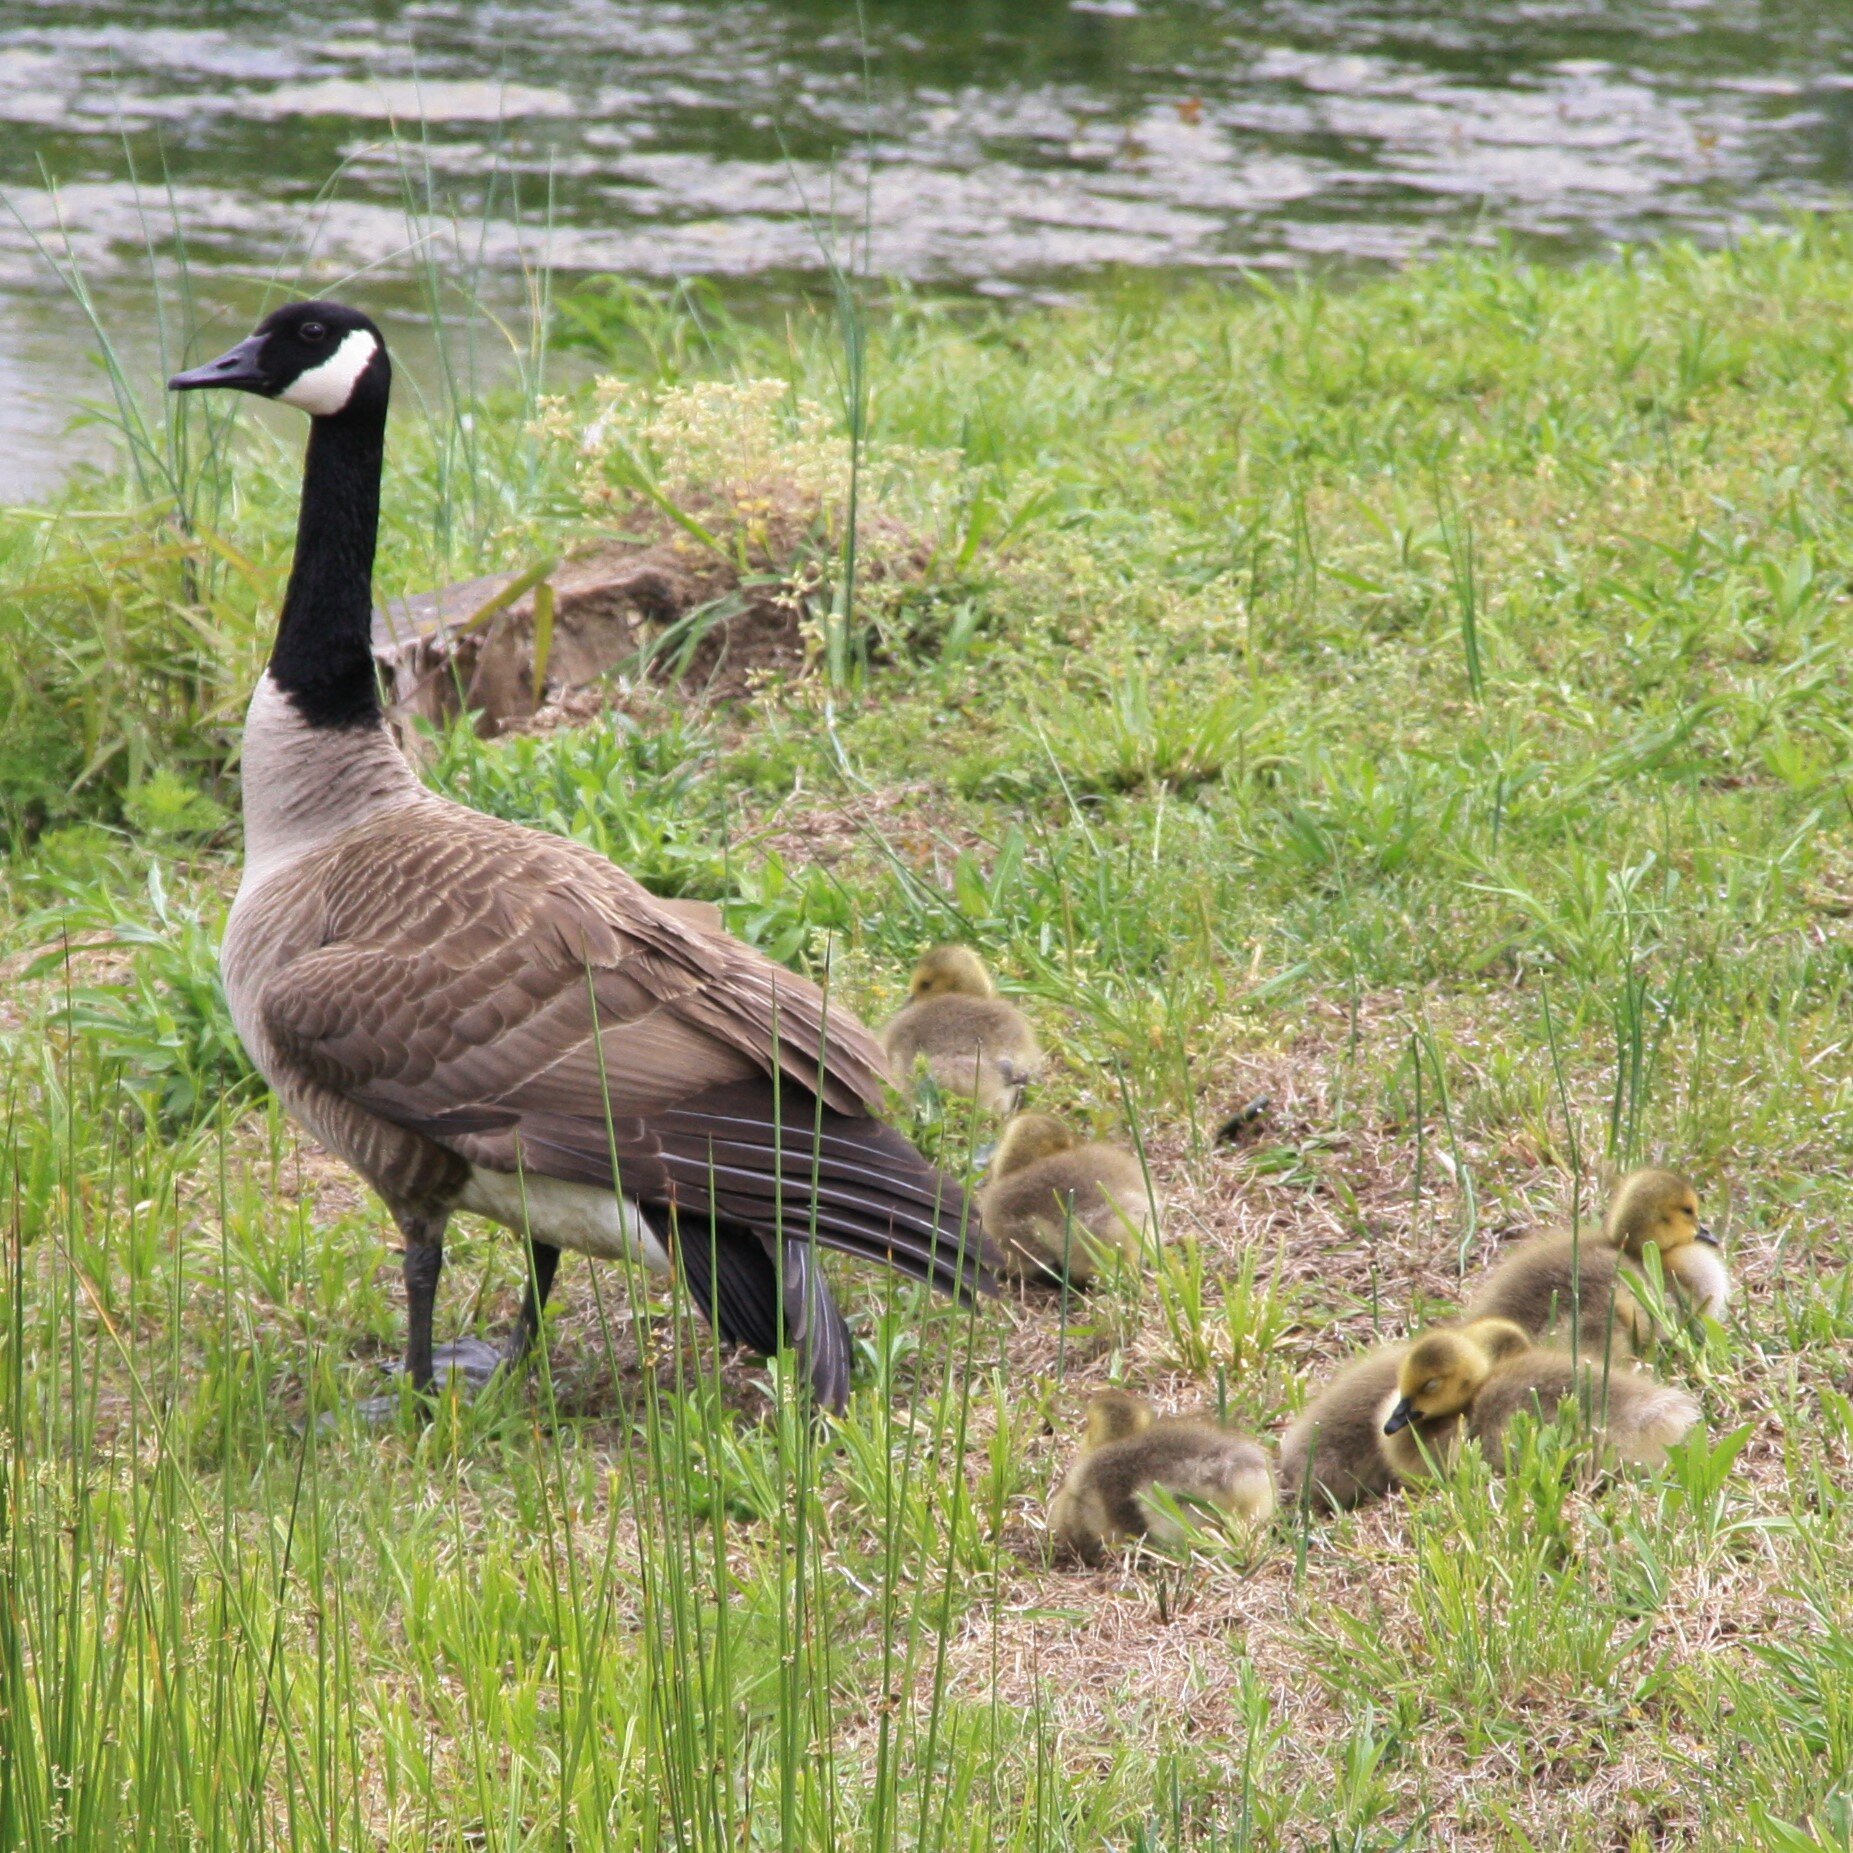 We have goslings this year!  